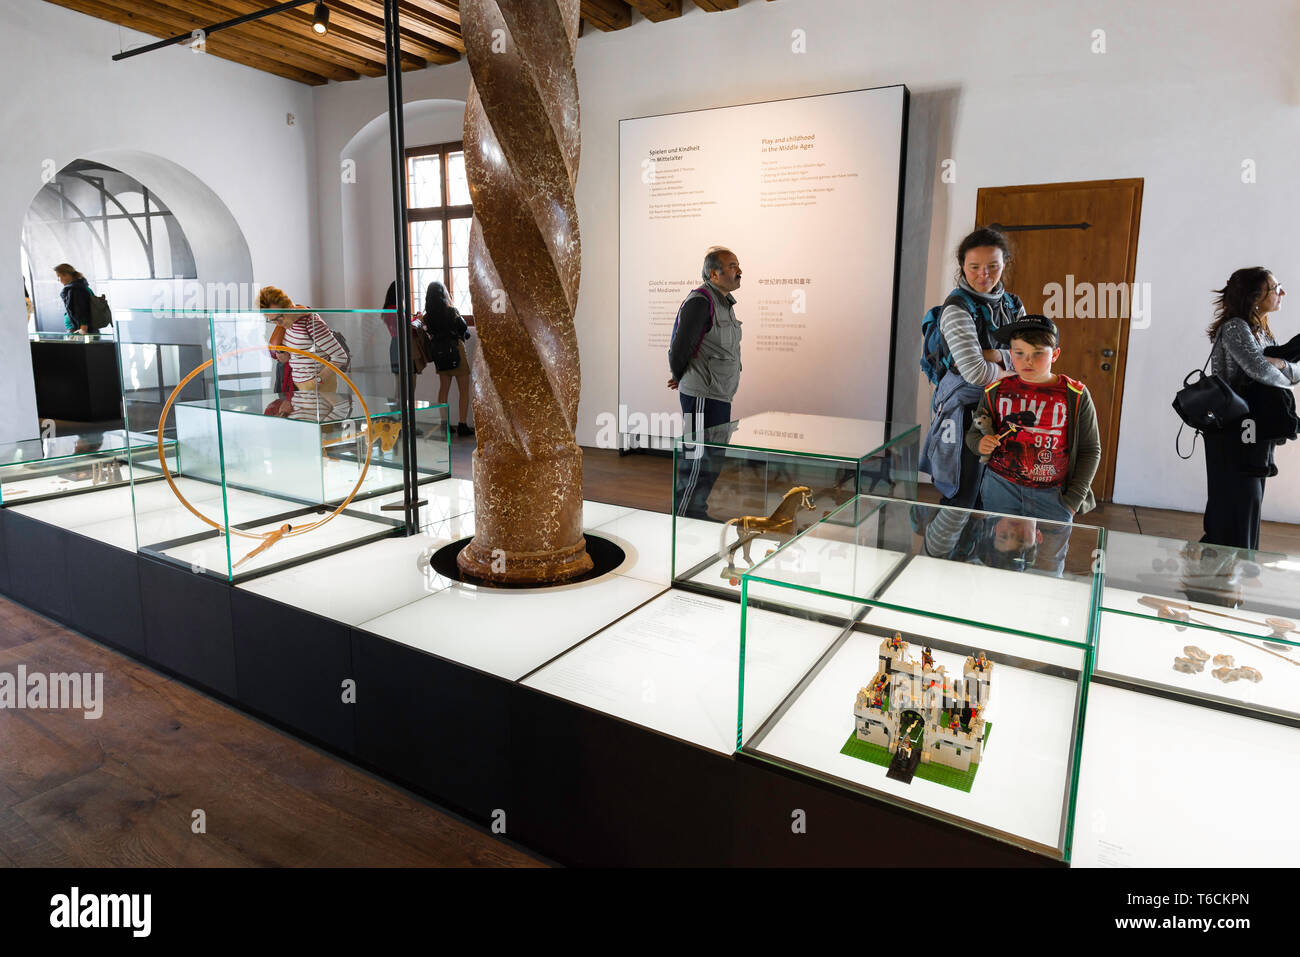 Salzburg Castle Museum, view of people looking at exhibits inside the Children's Museum located within the castle buildings in Salzburg, Austria. Stock Photo